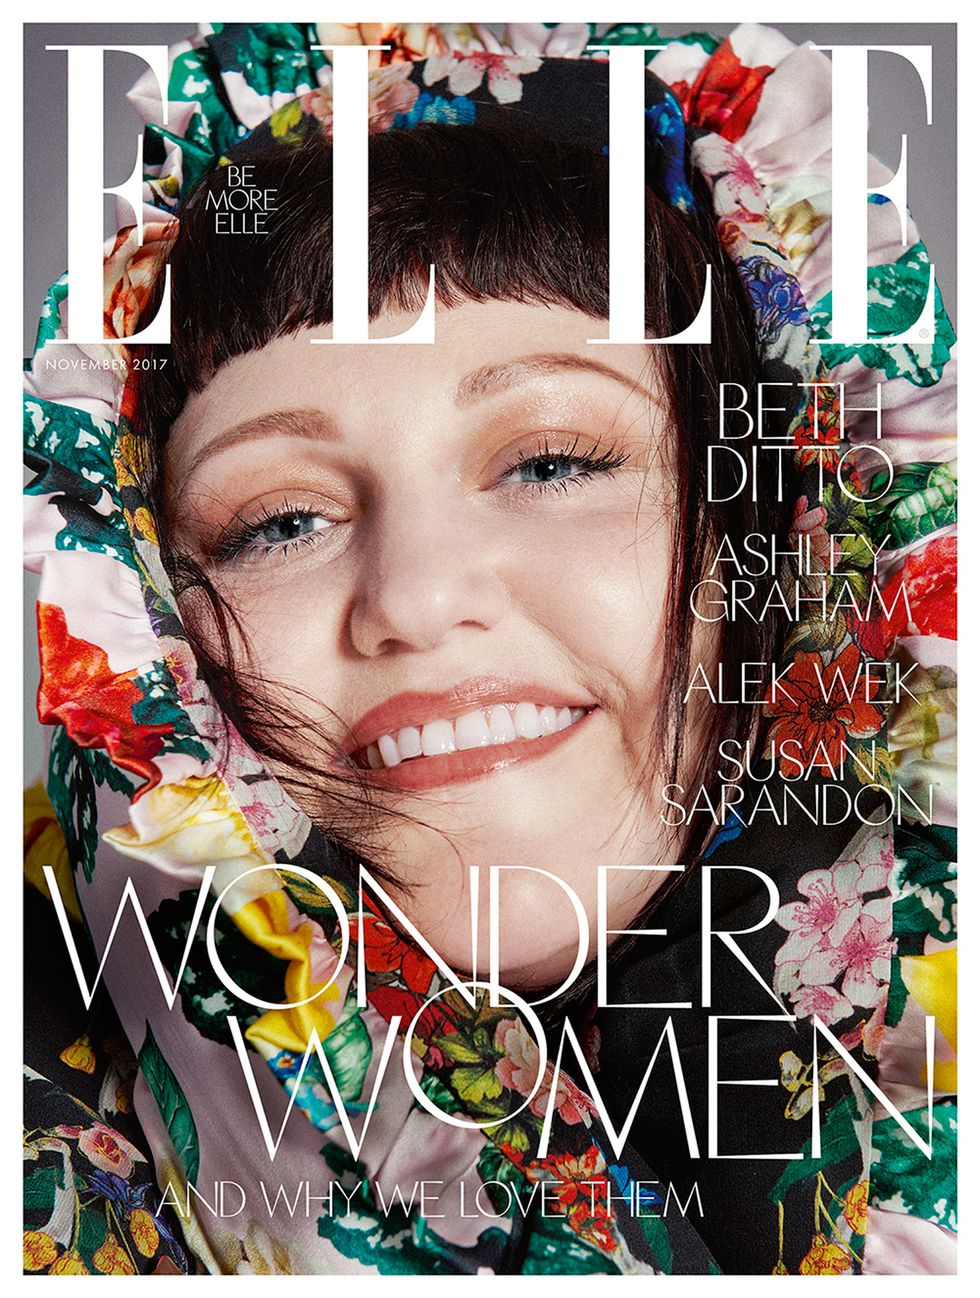 Beth Ditto on the cover of ELLE's Wonder Women issue, photographed by Sofia Sanchez and Mauro Mongiello